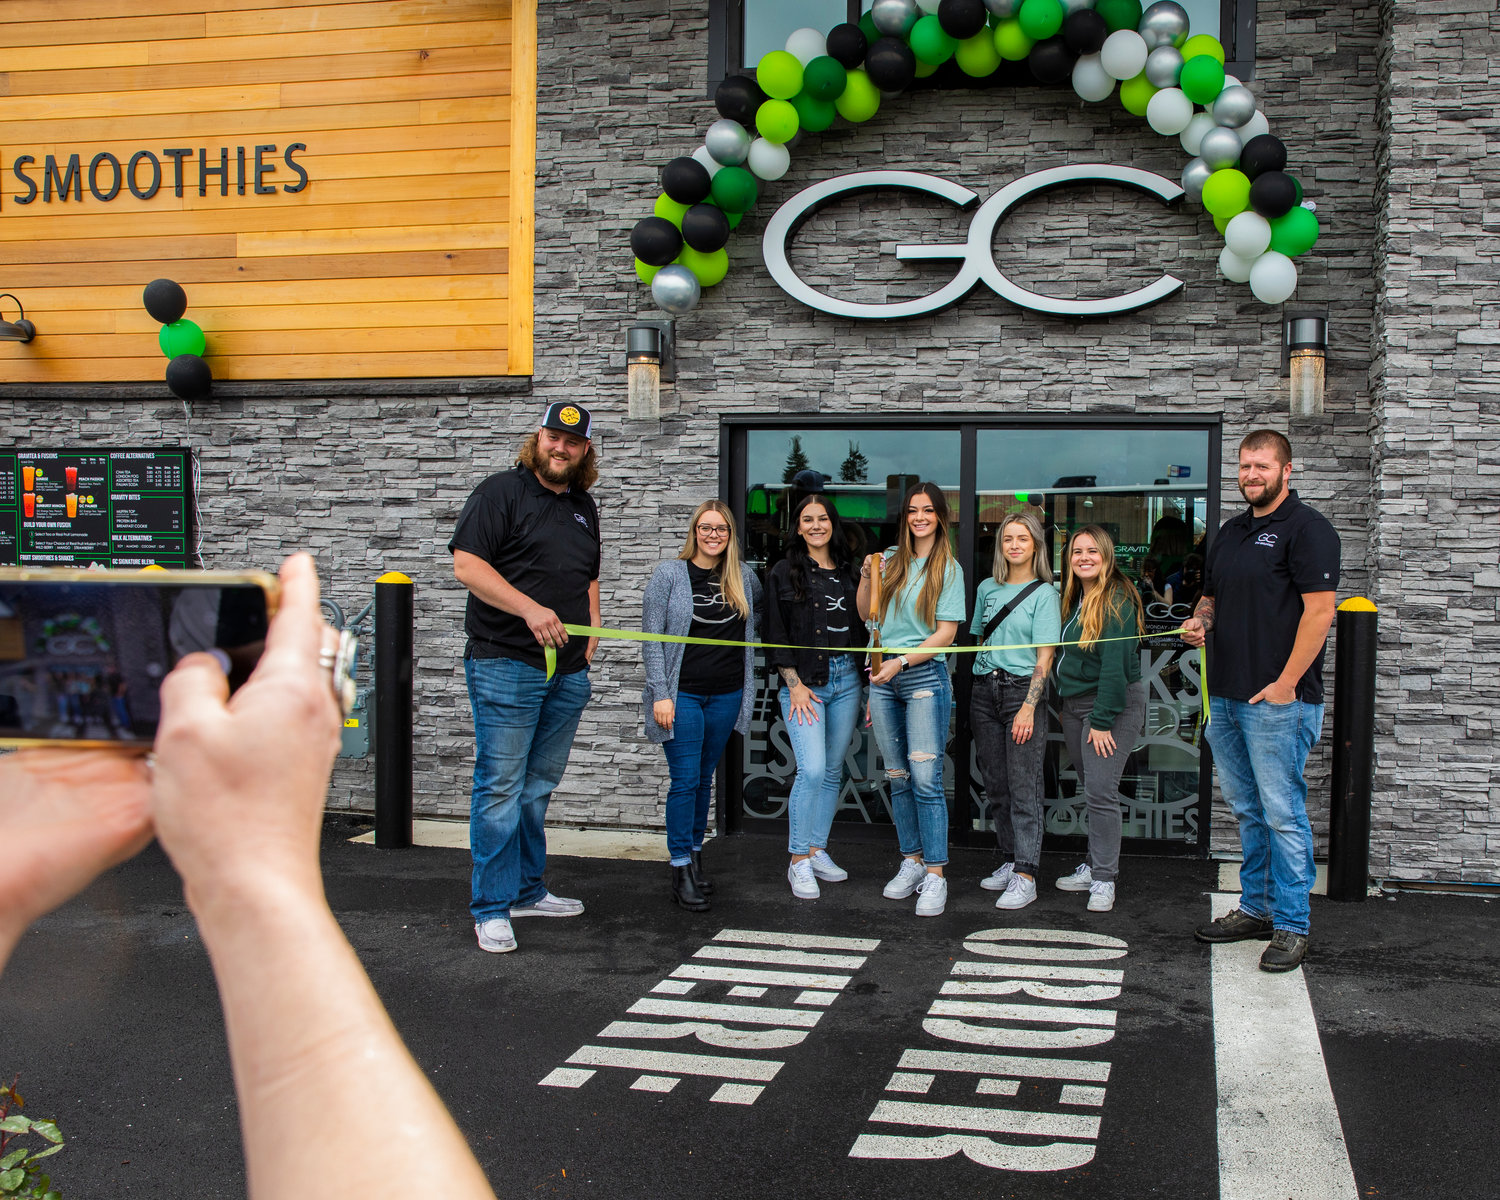 Employees at Gravity Coffee smile and pose for a photo during a grand opening and ribbon-cutting ceremony Friday in Centralia. The business is located at 712 Harrison Ave., Centralia.